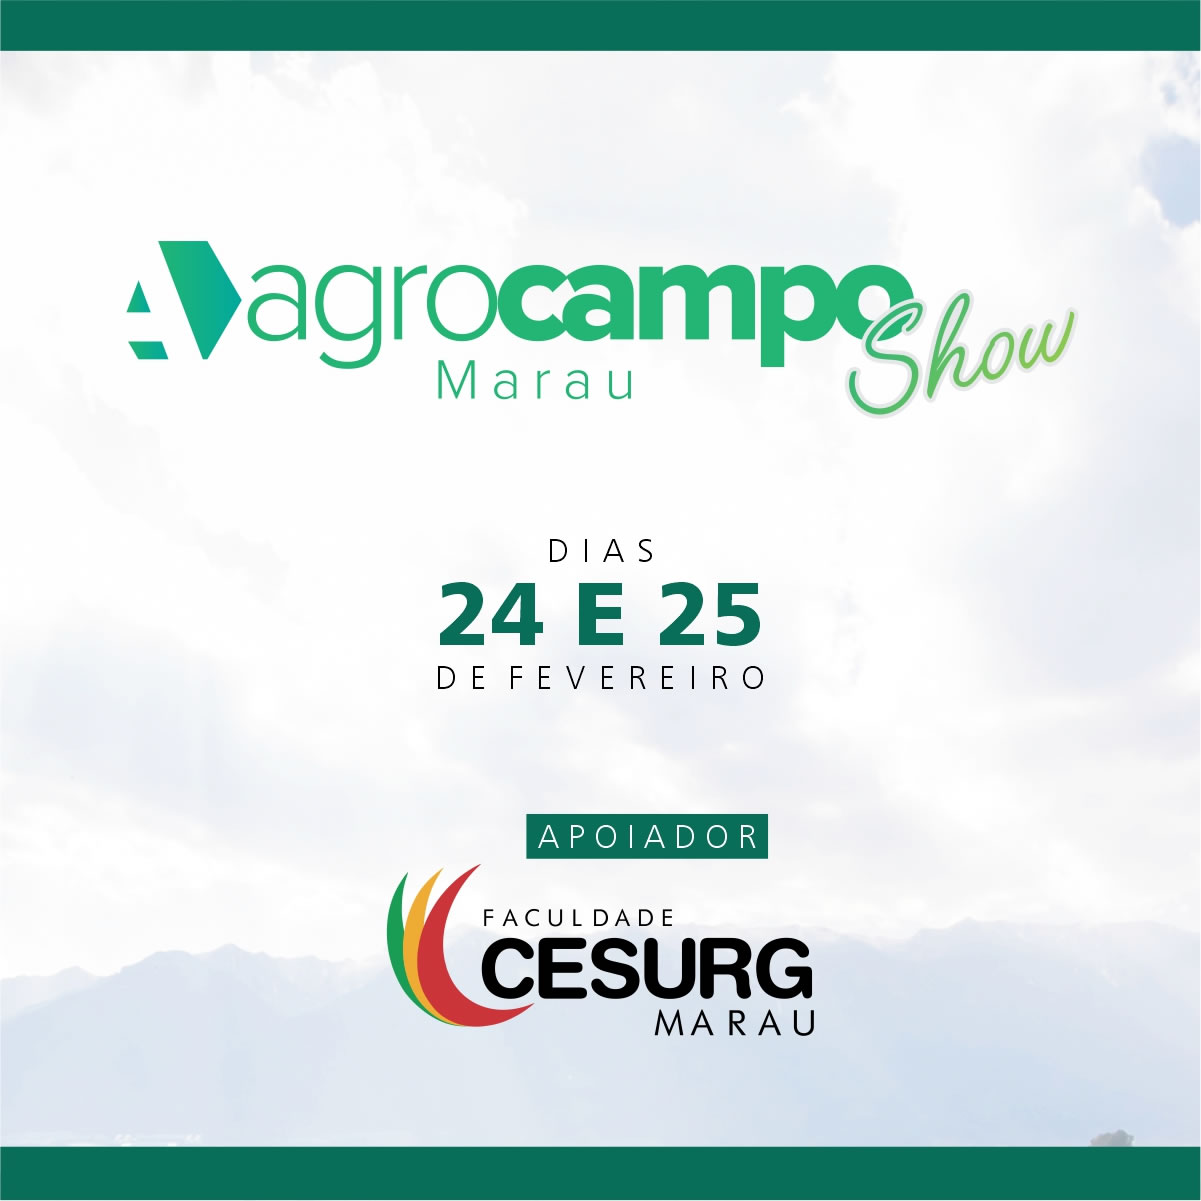 agrocamposhow-2021-1